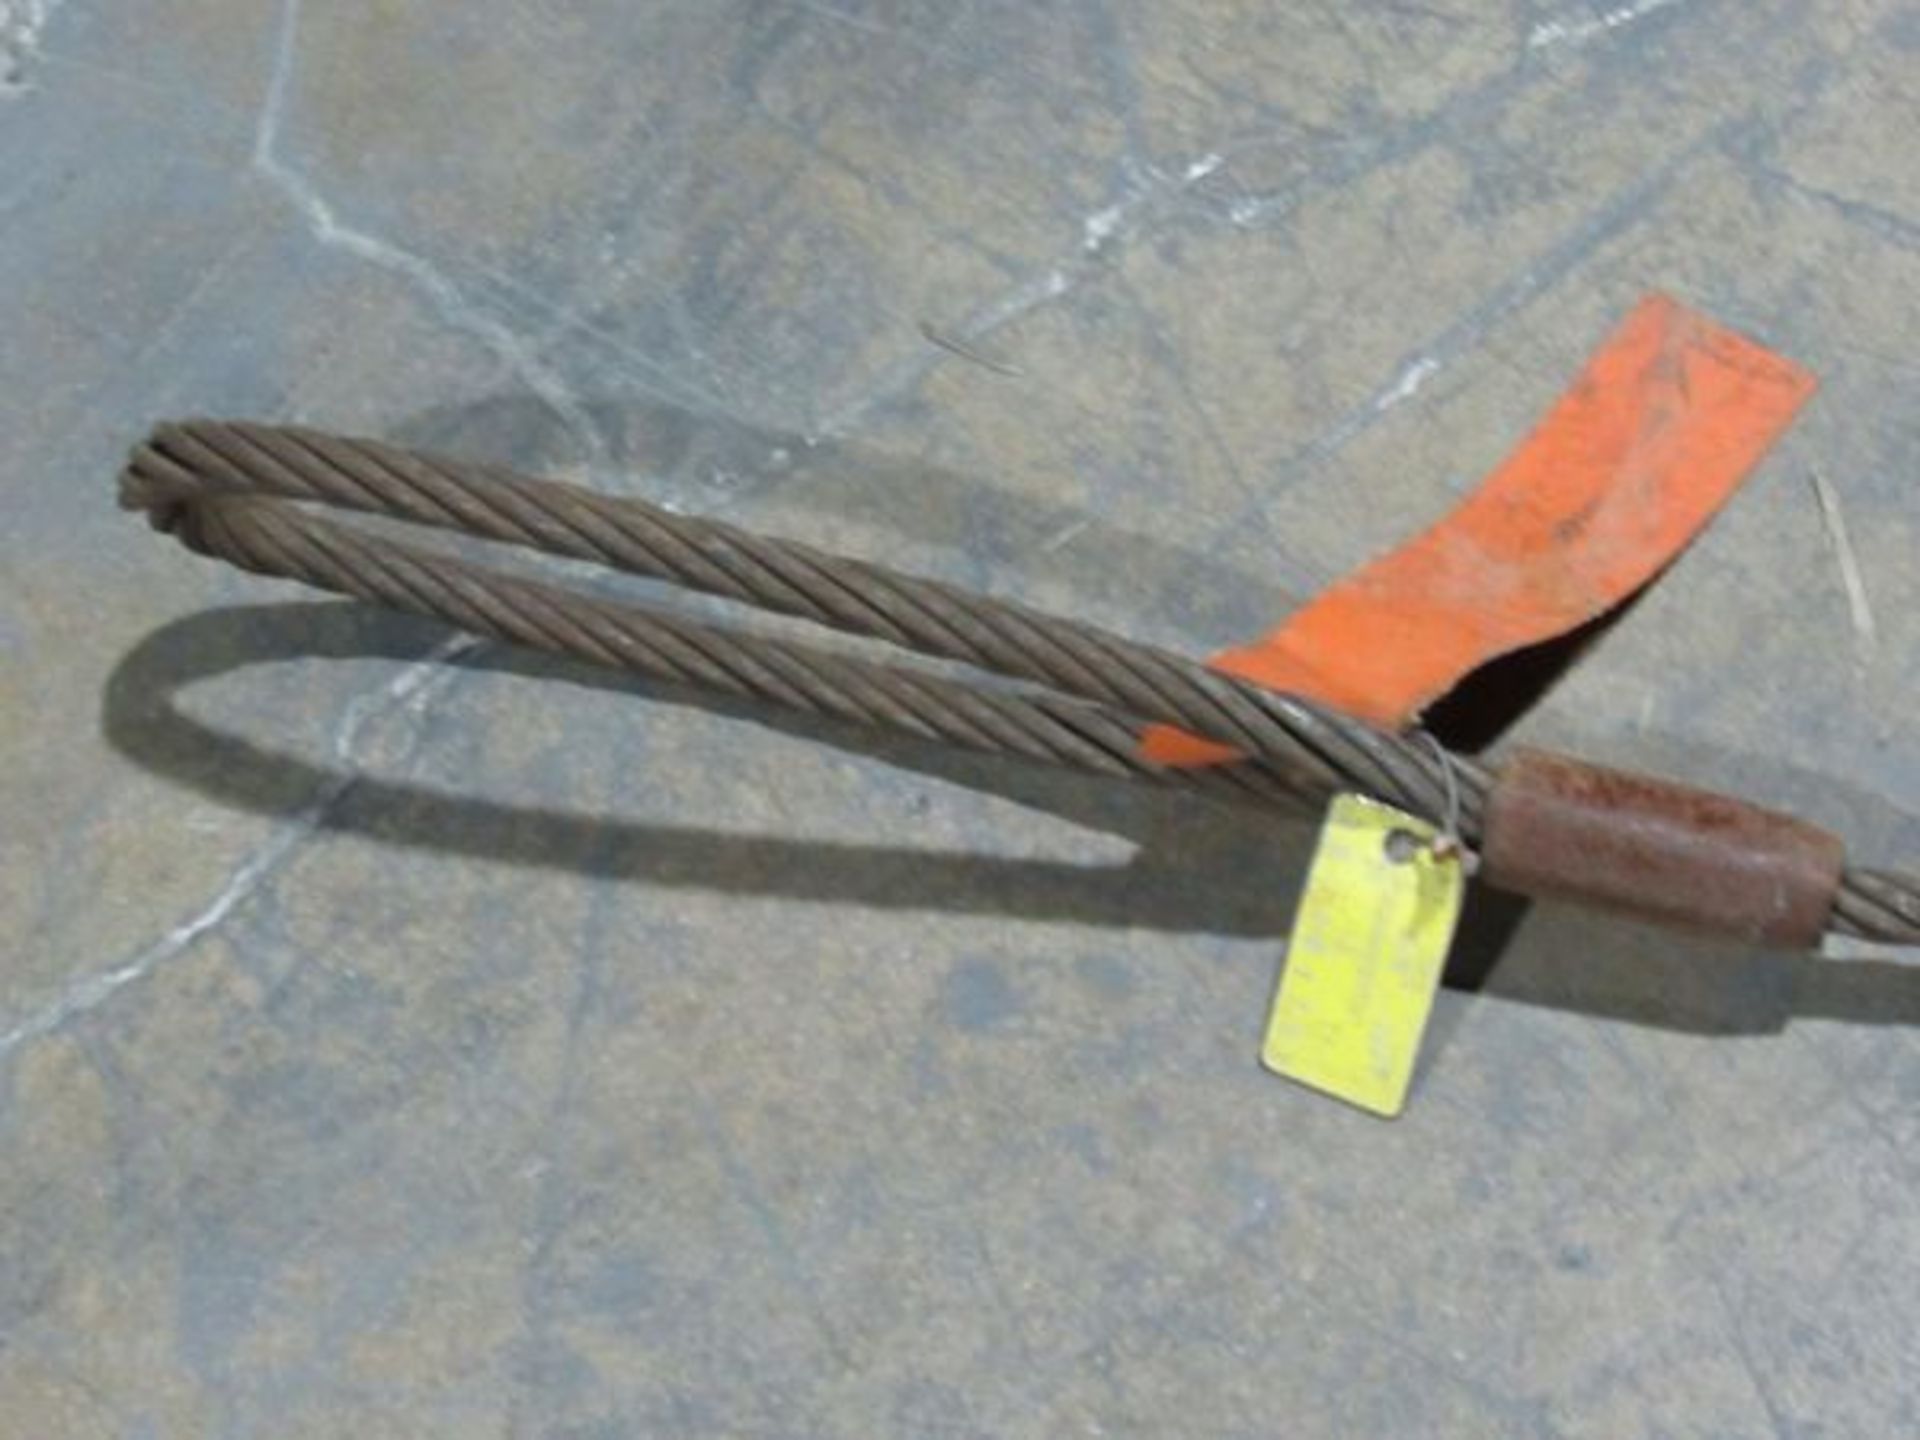 Assorted Braided Steel Lifting Slings- MFR - Total Tool, Lindi Sling Sizes Range From 3/8" to 1" - Image 6 of 20